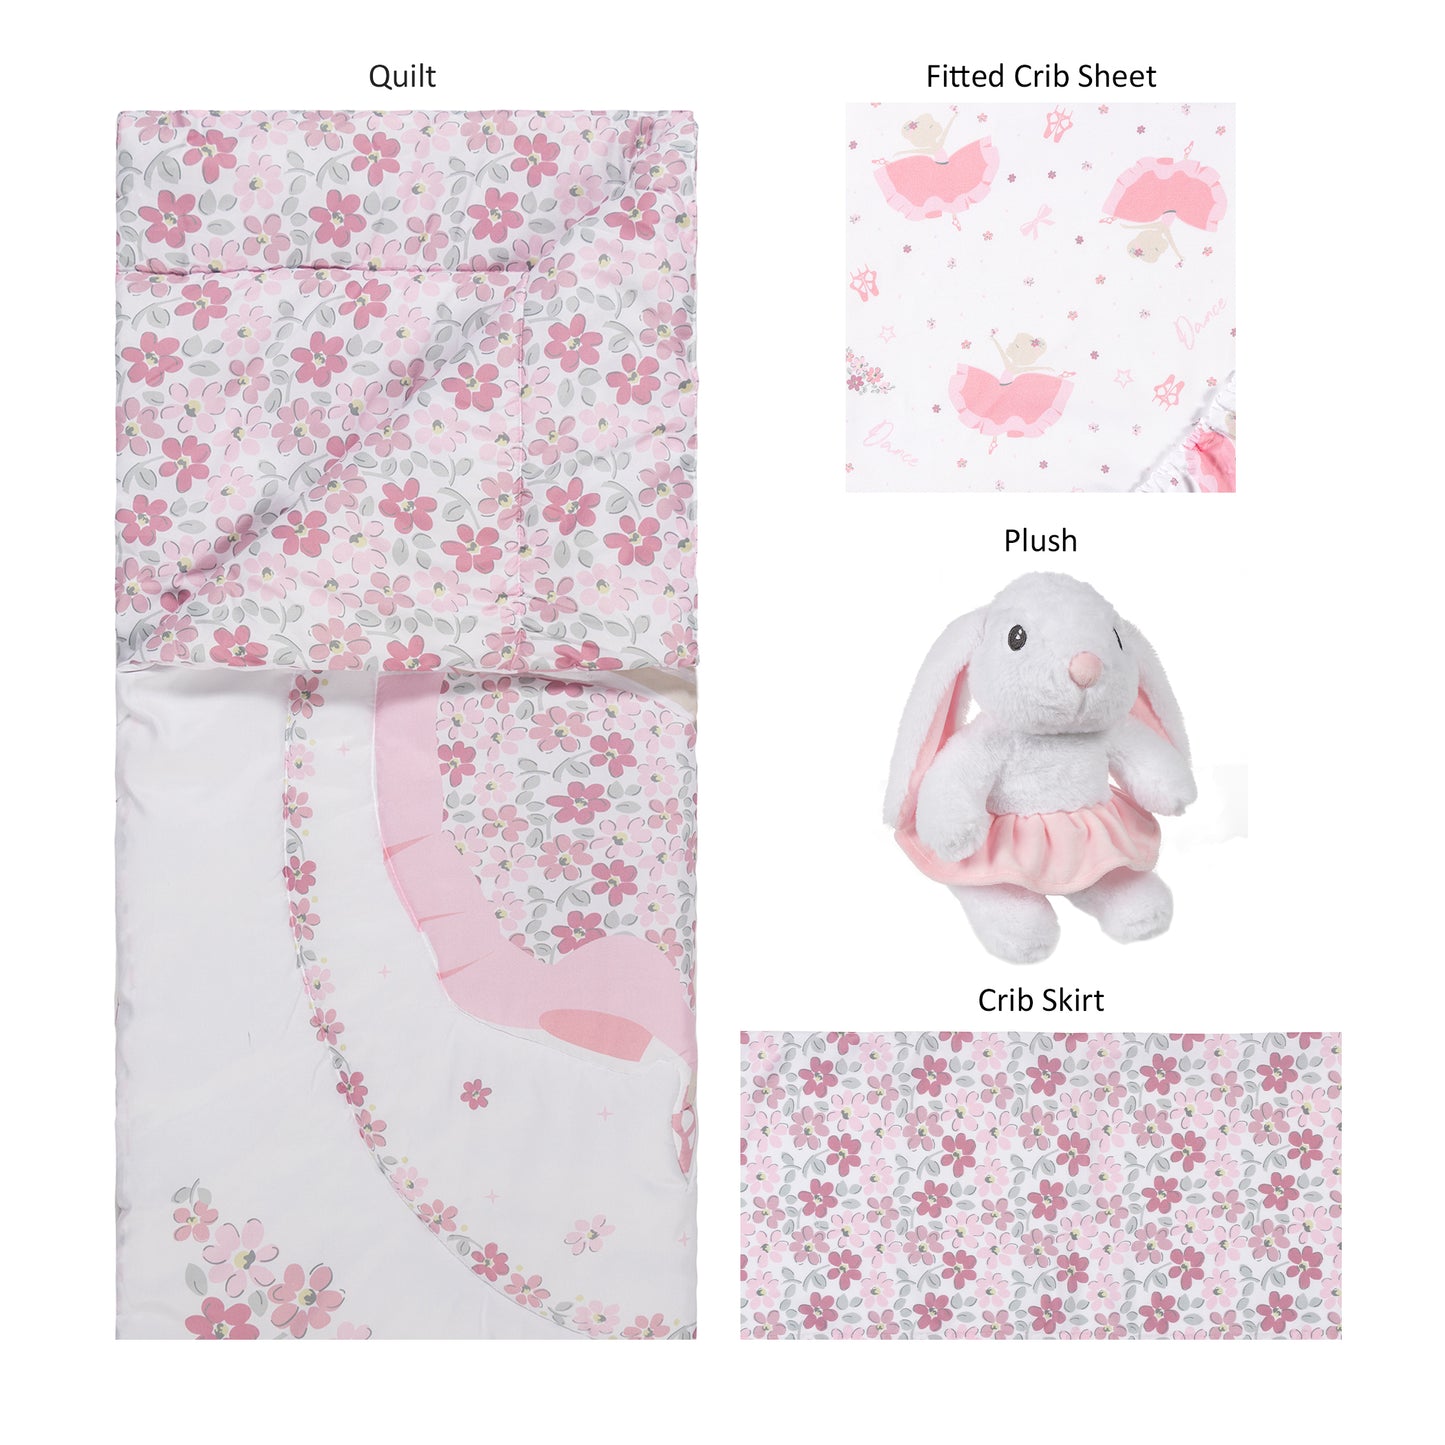  Blooming Ballet 4 Piece Crib Bedding Set pieces laid out- features reversible crib quilt, bunny plush, crib sheet and crib skirt by Sammy and Lou